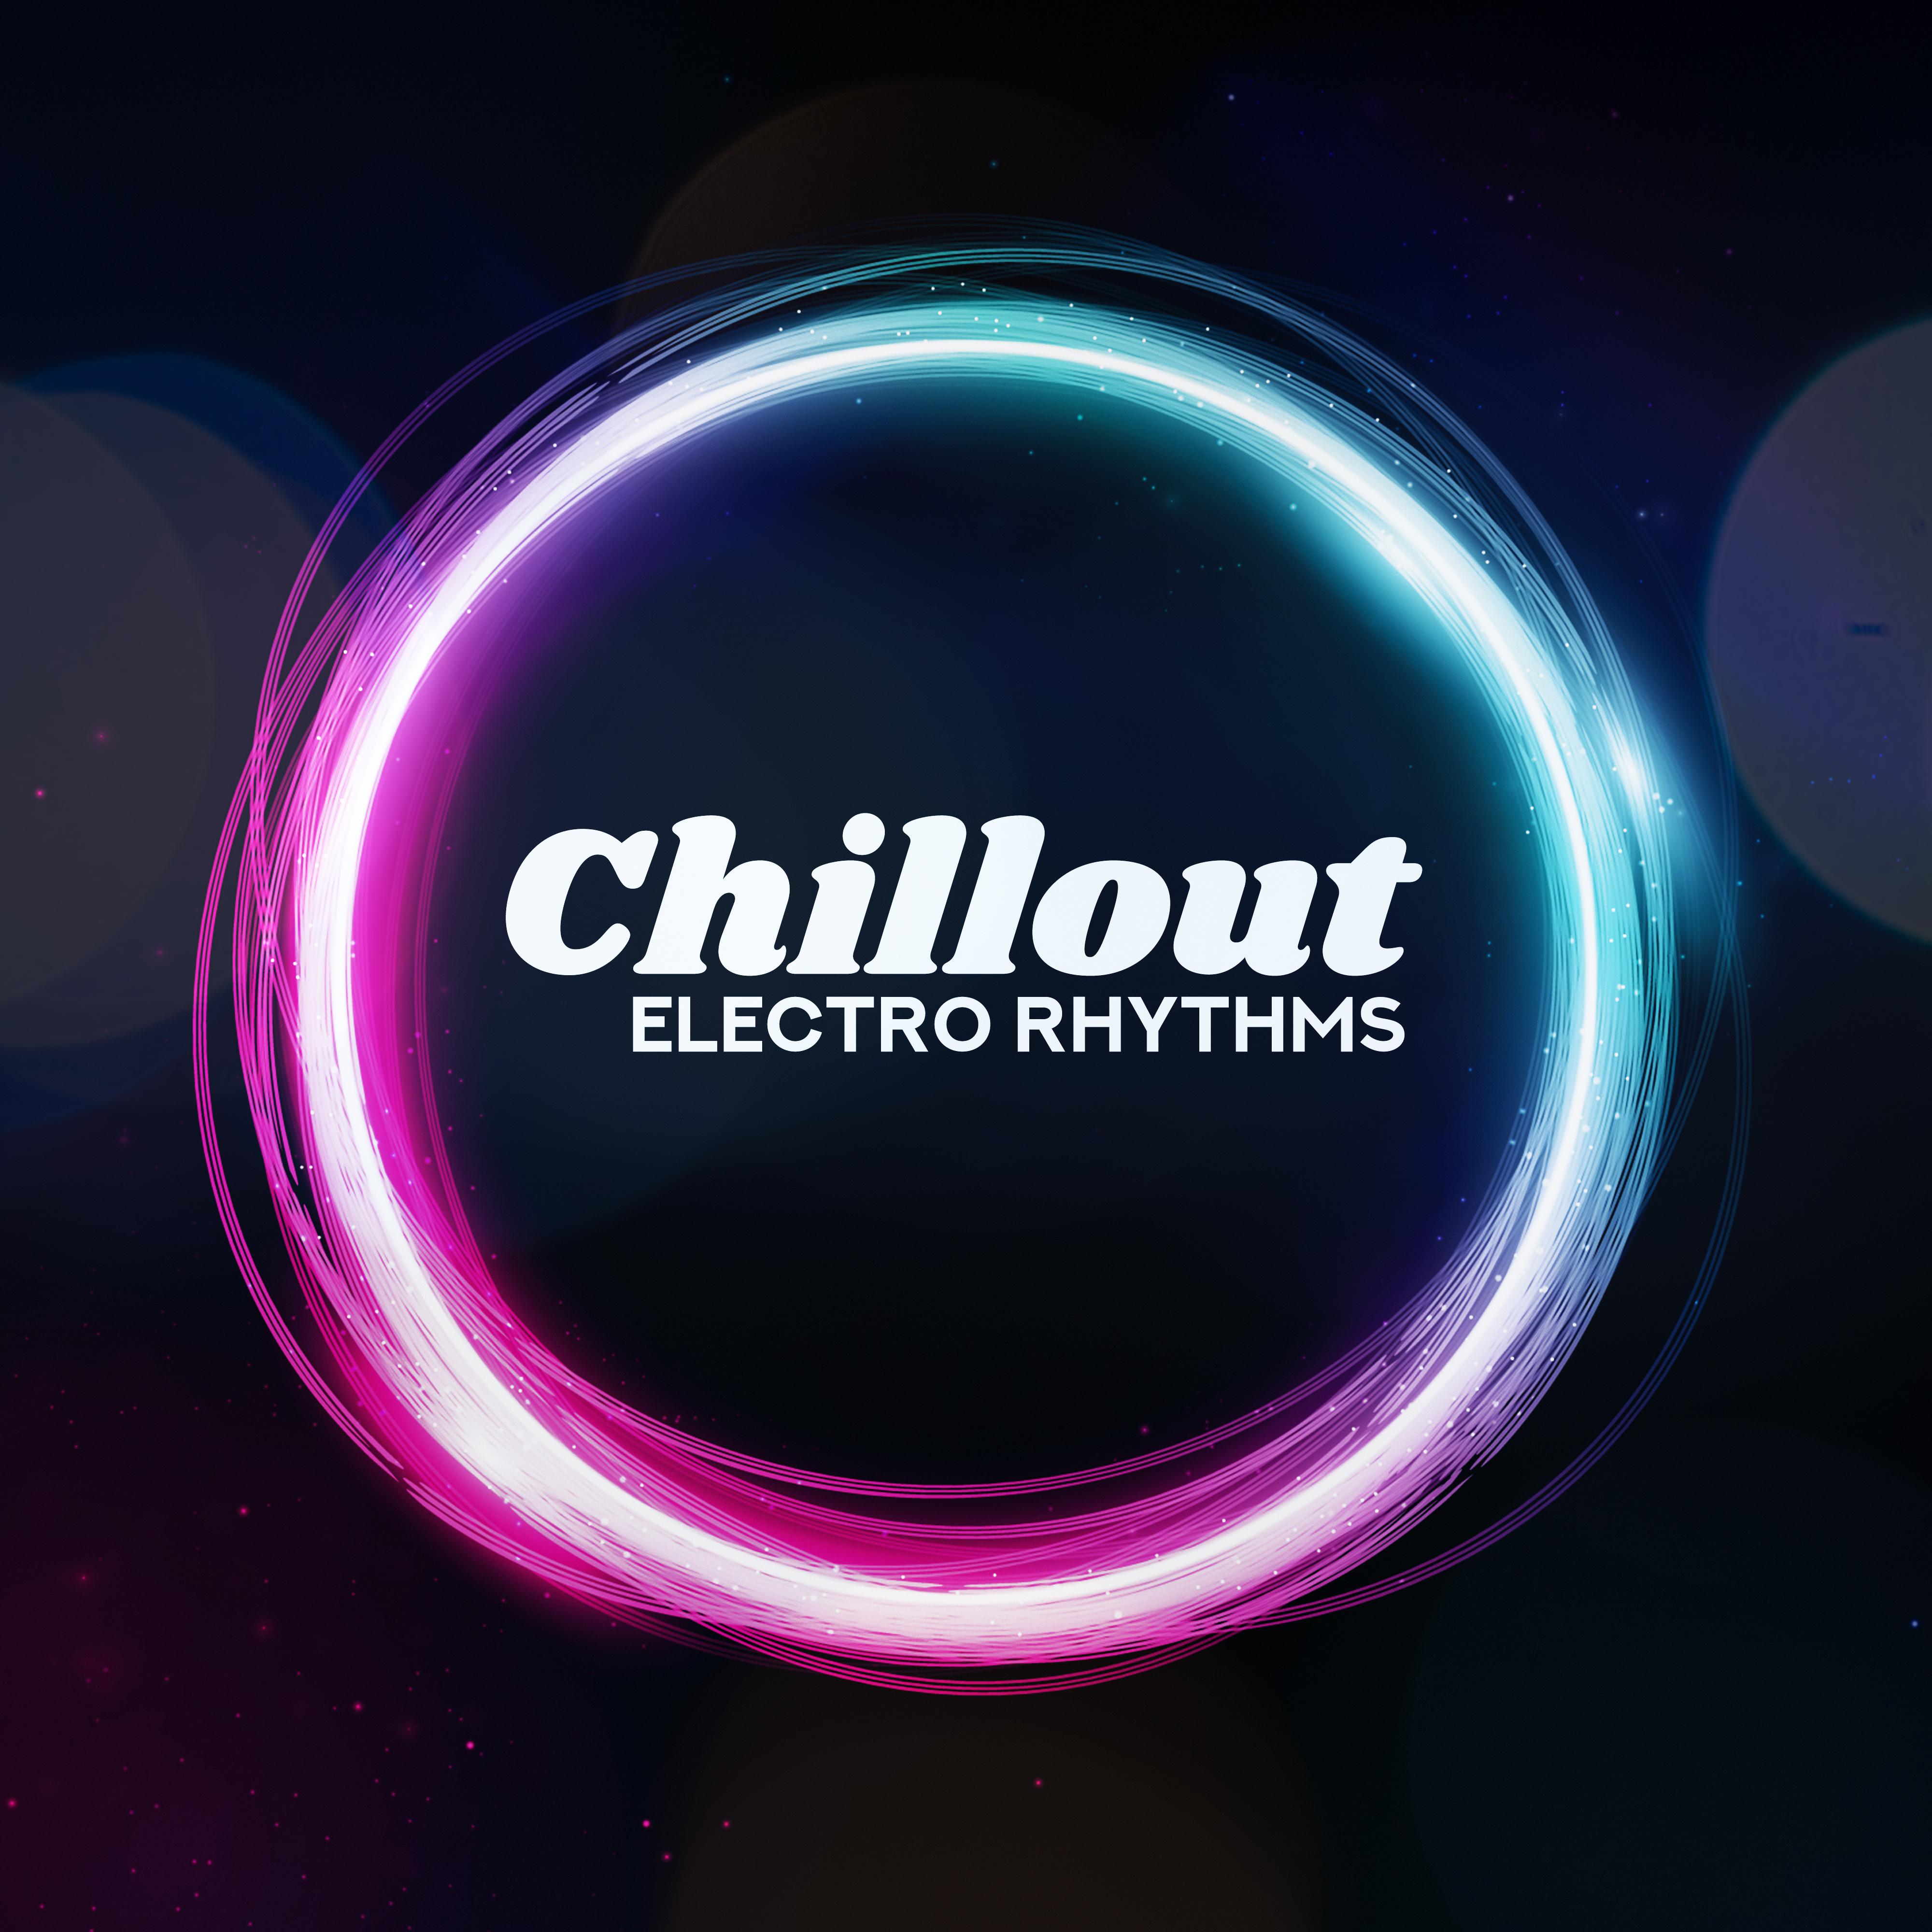 Chillout Electro Rhythms: 15 House Tunes for Summer 2019